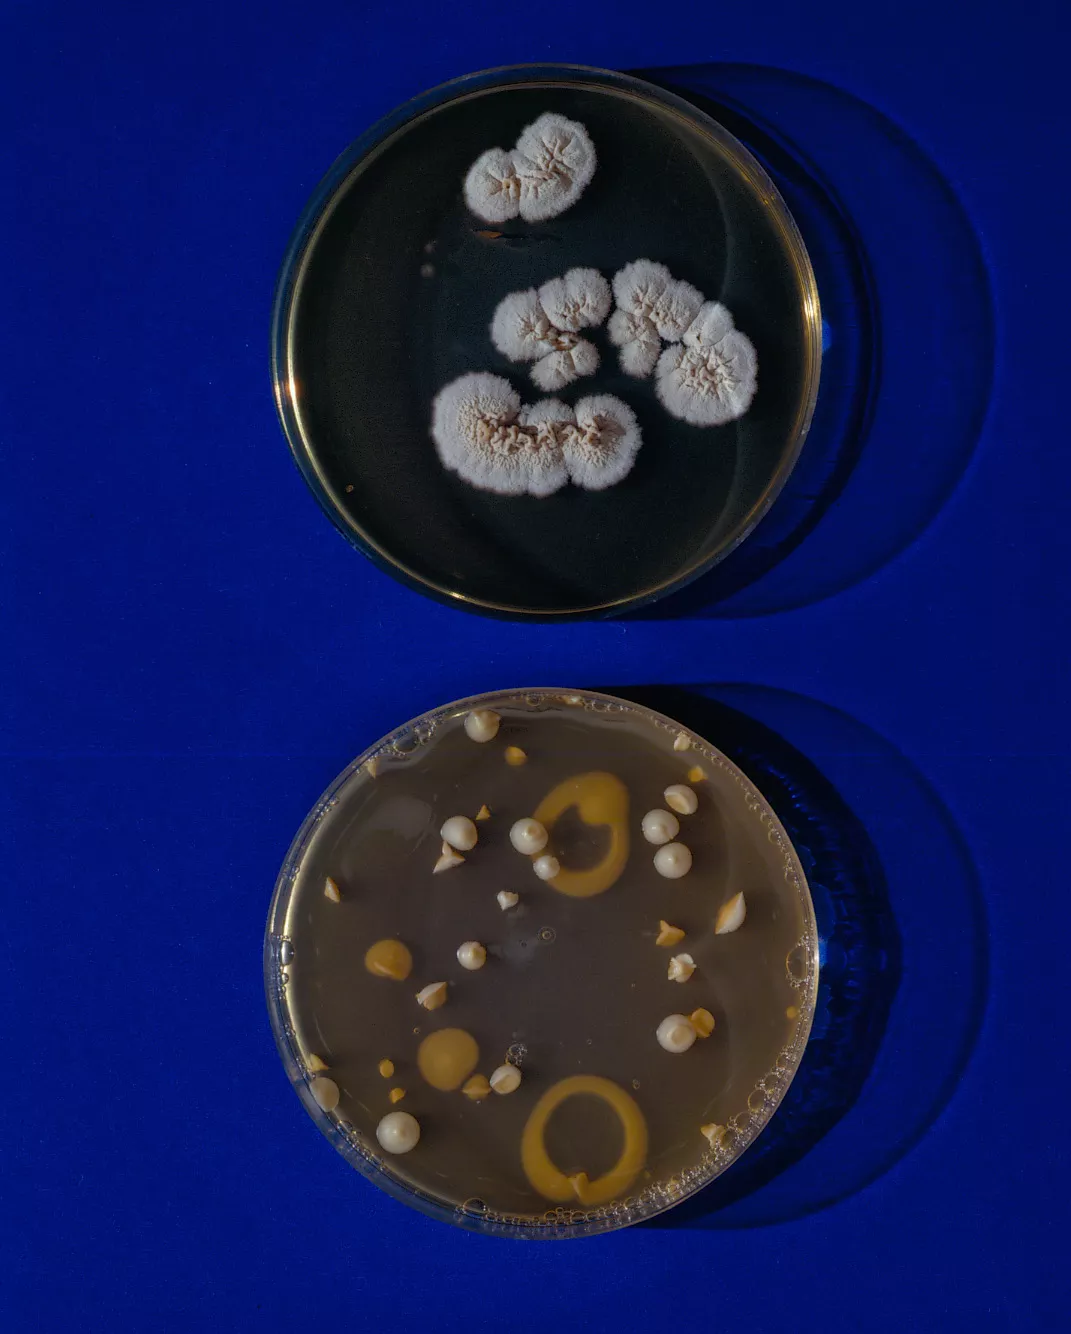 Close up photography of microbiological culture